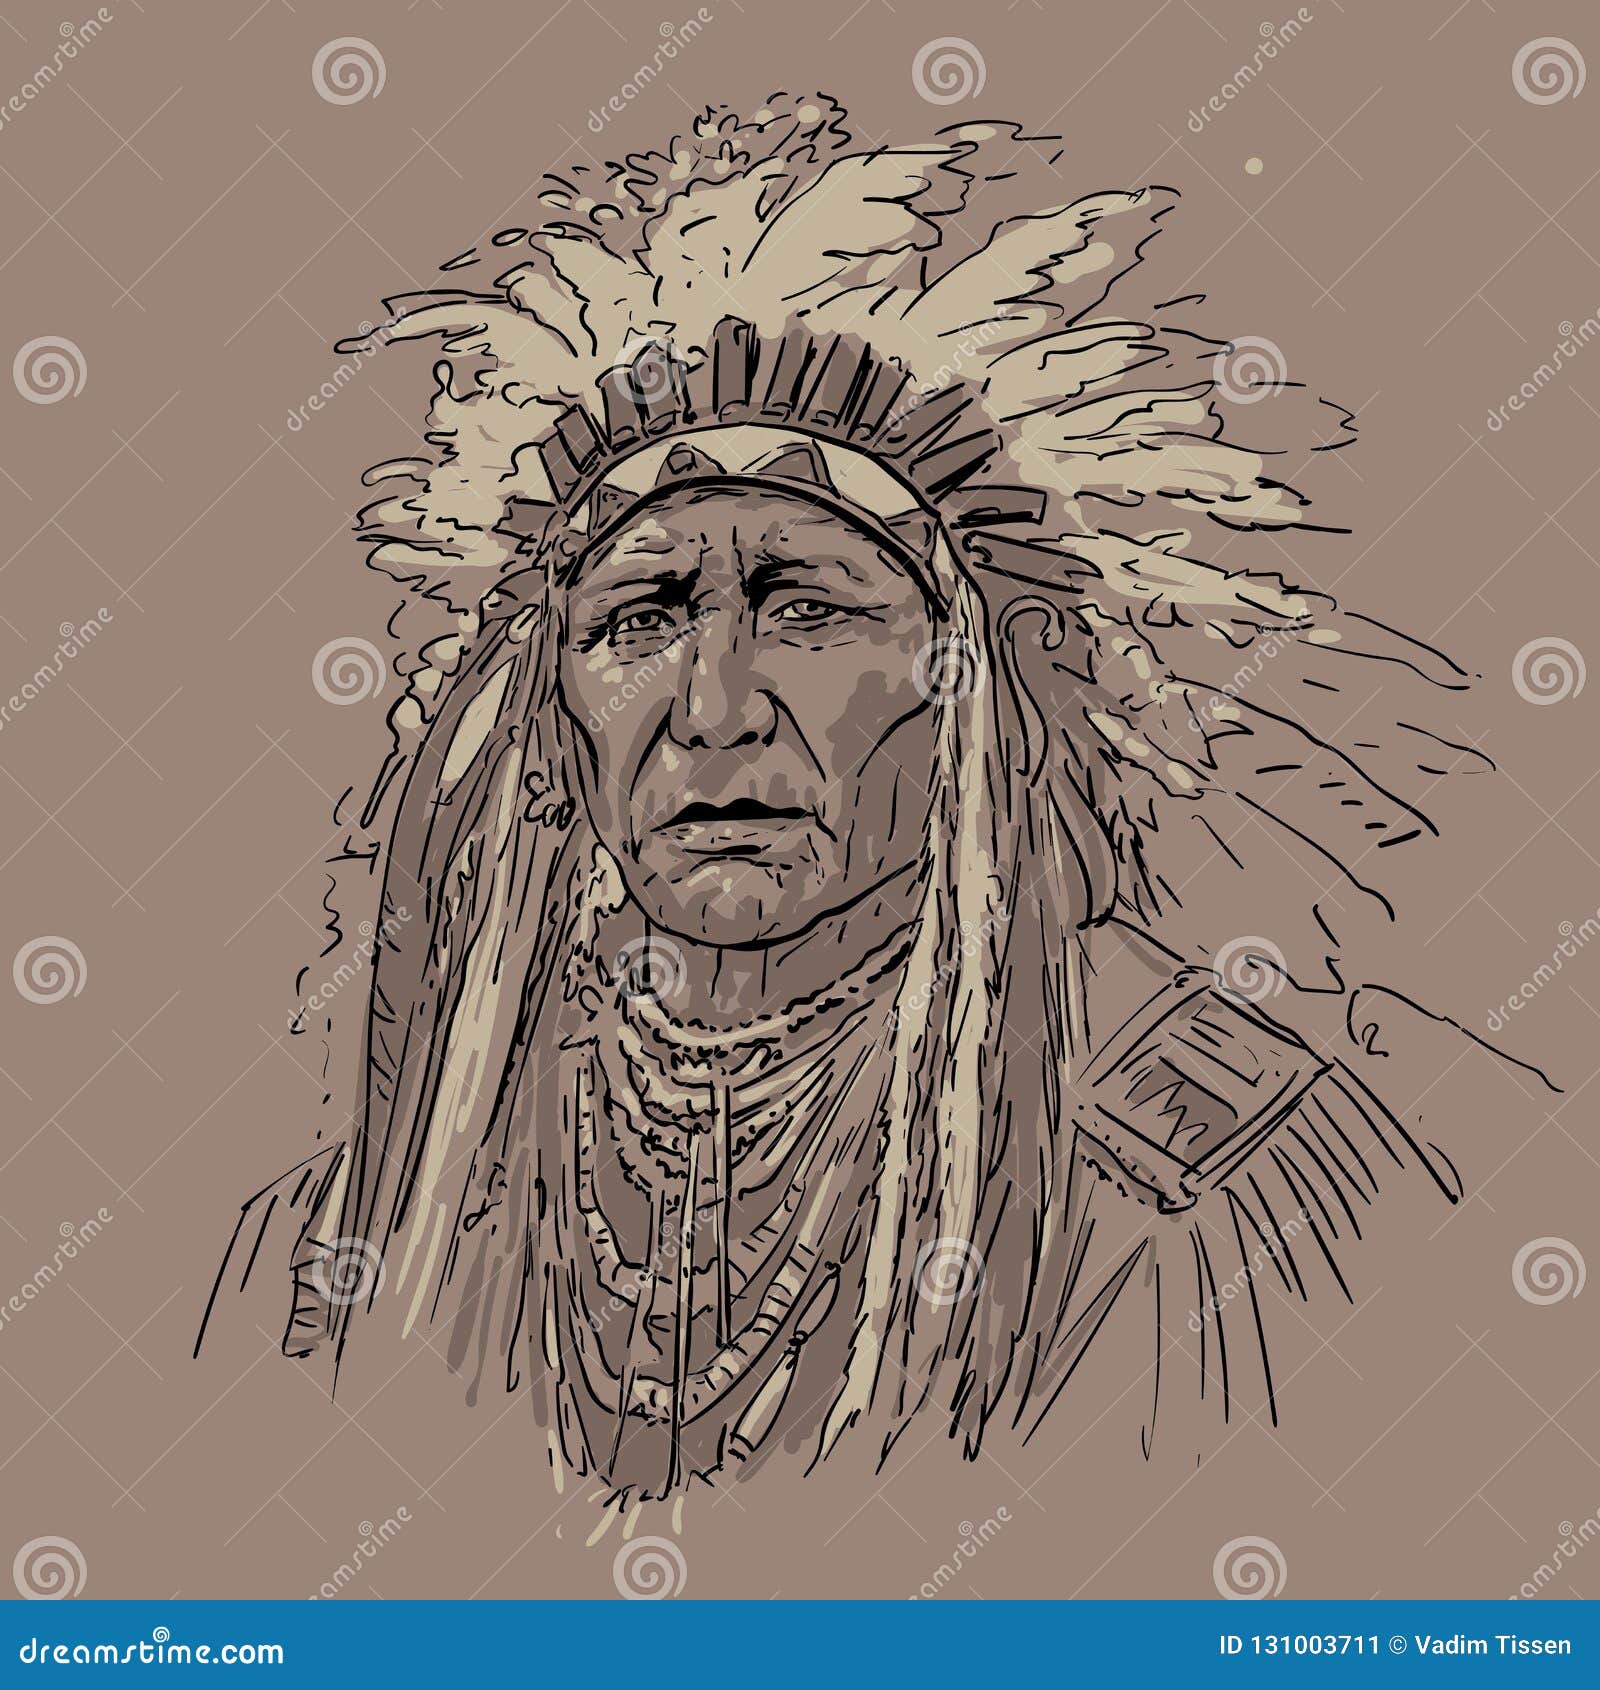 American Indian Art Stock Vector Illustration and Royalty Free American  Indian Art Clipart